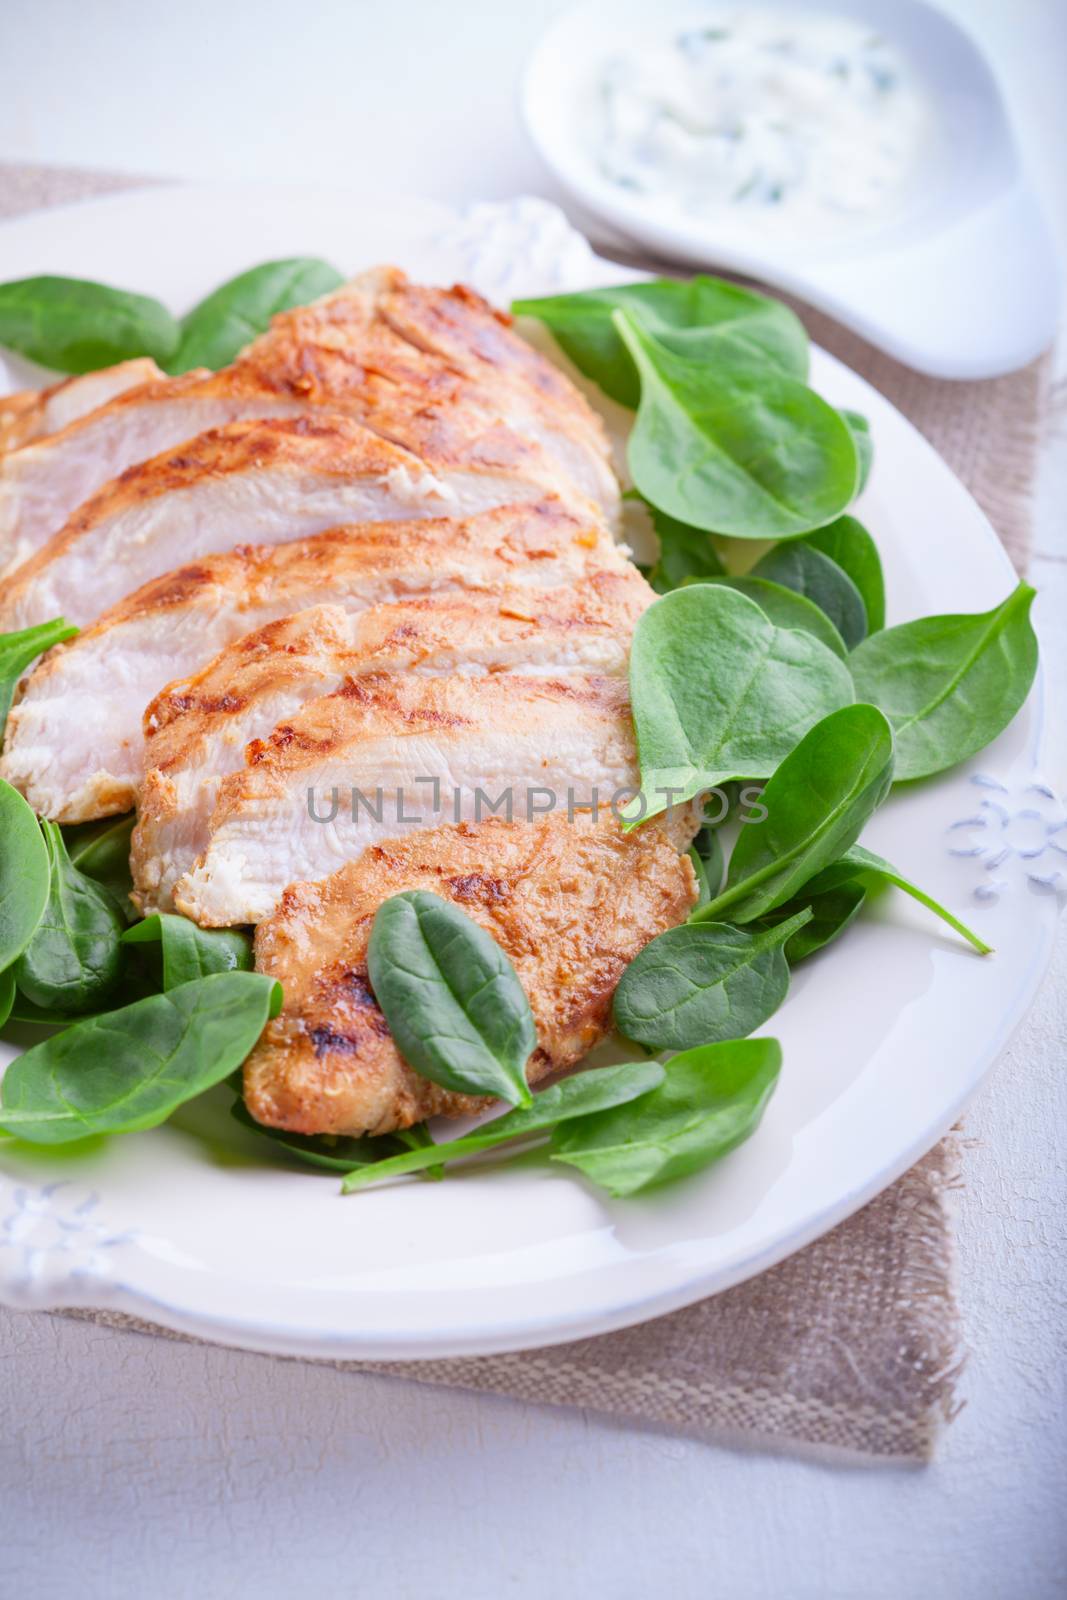 Grilled chicken breast with greenery on a plate